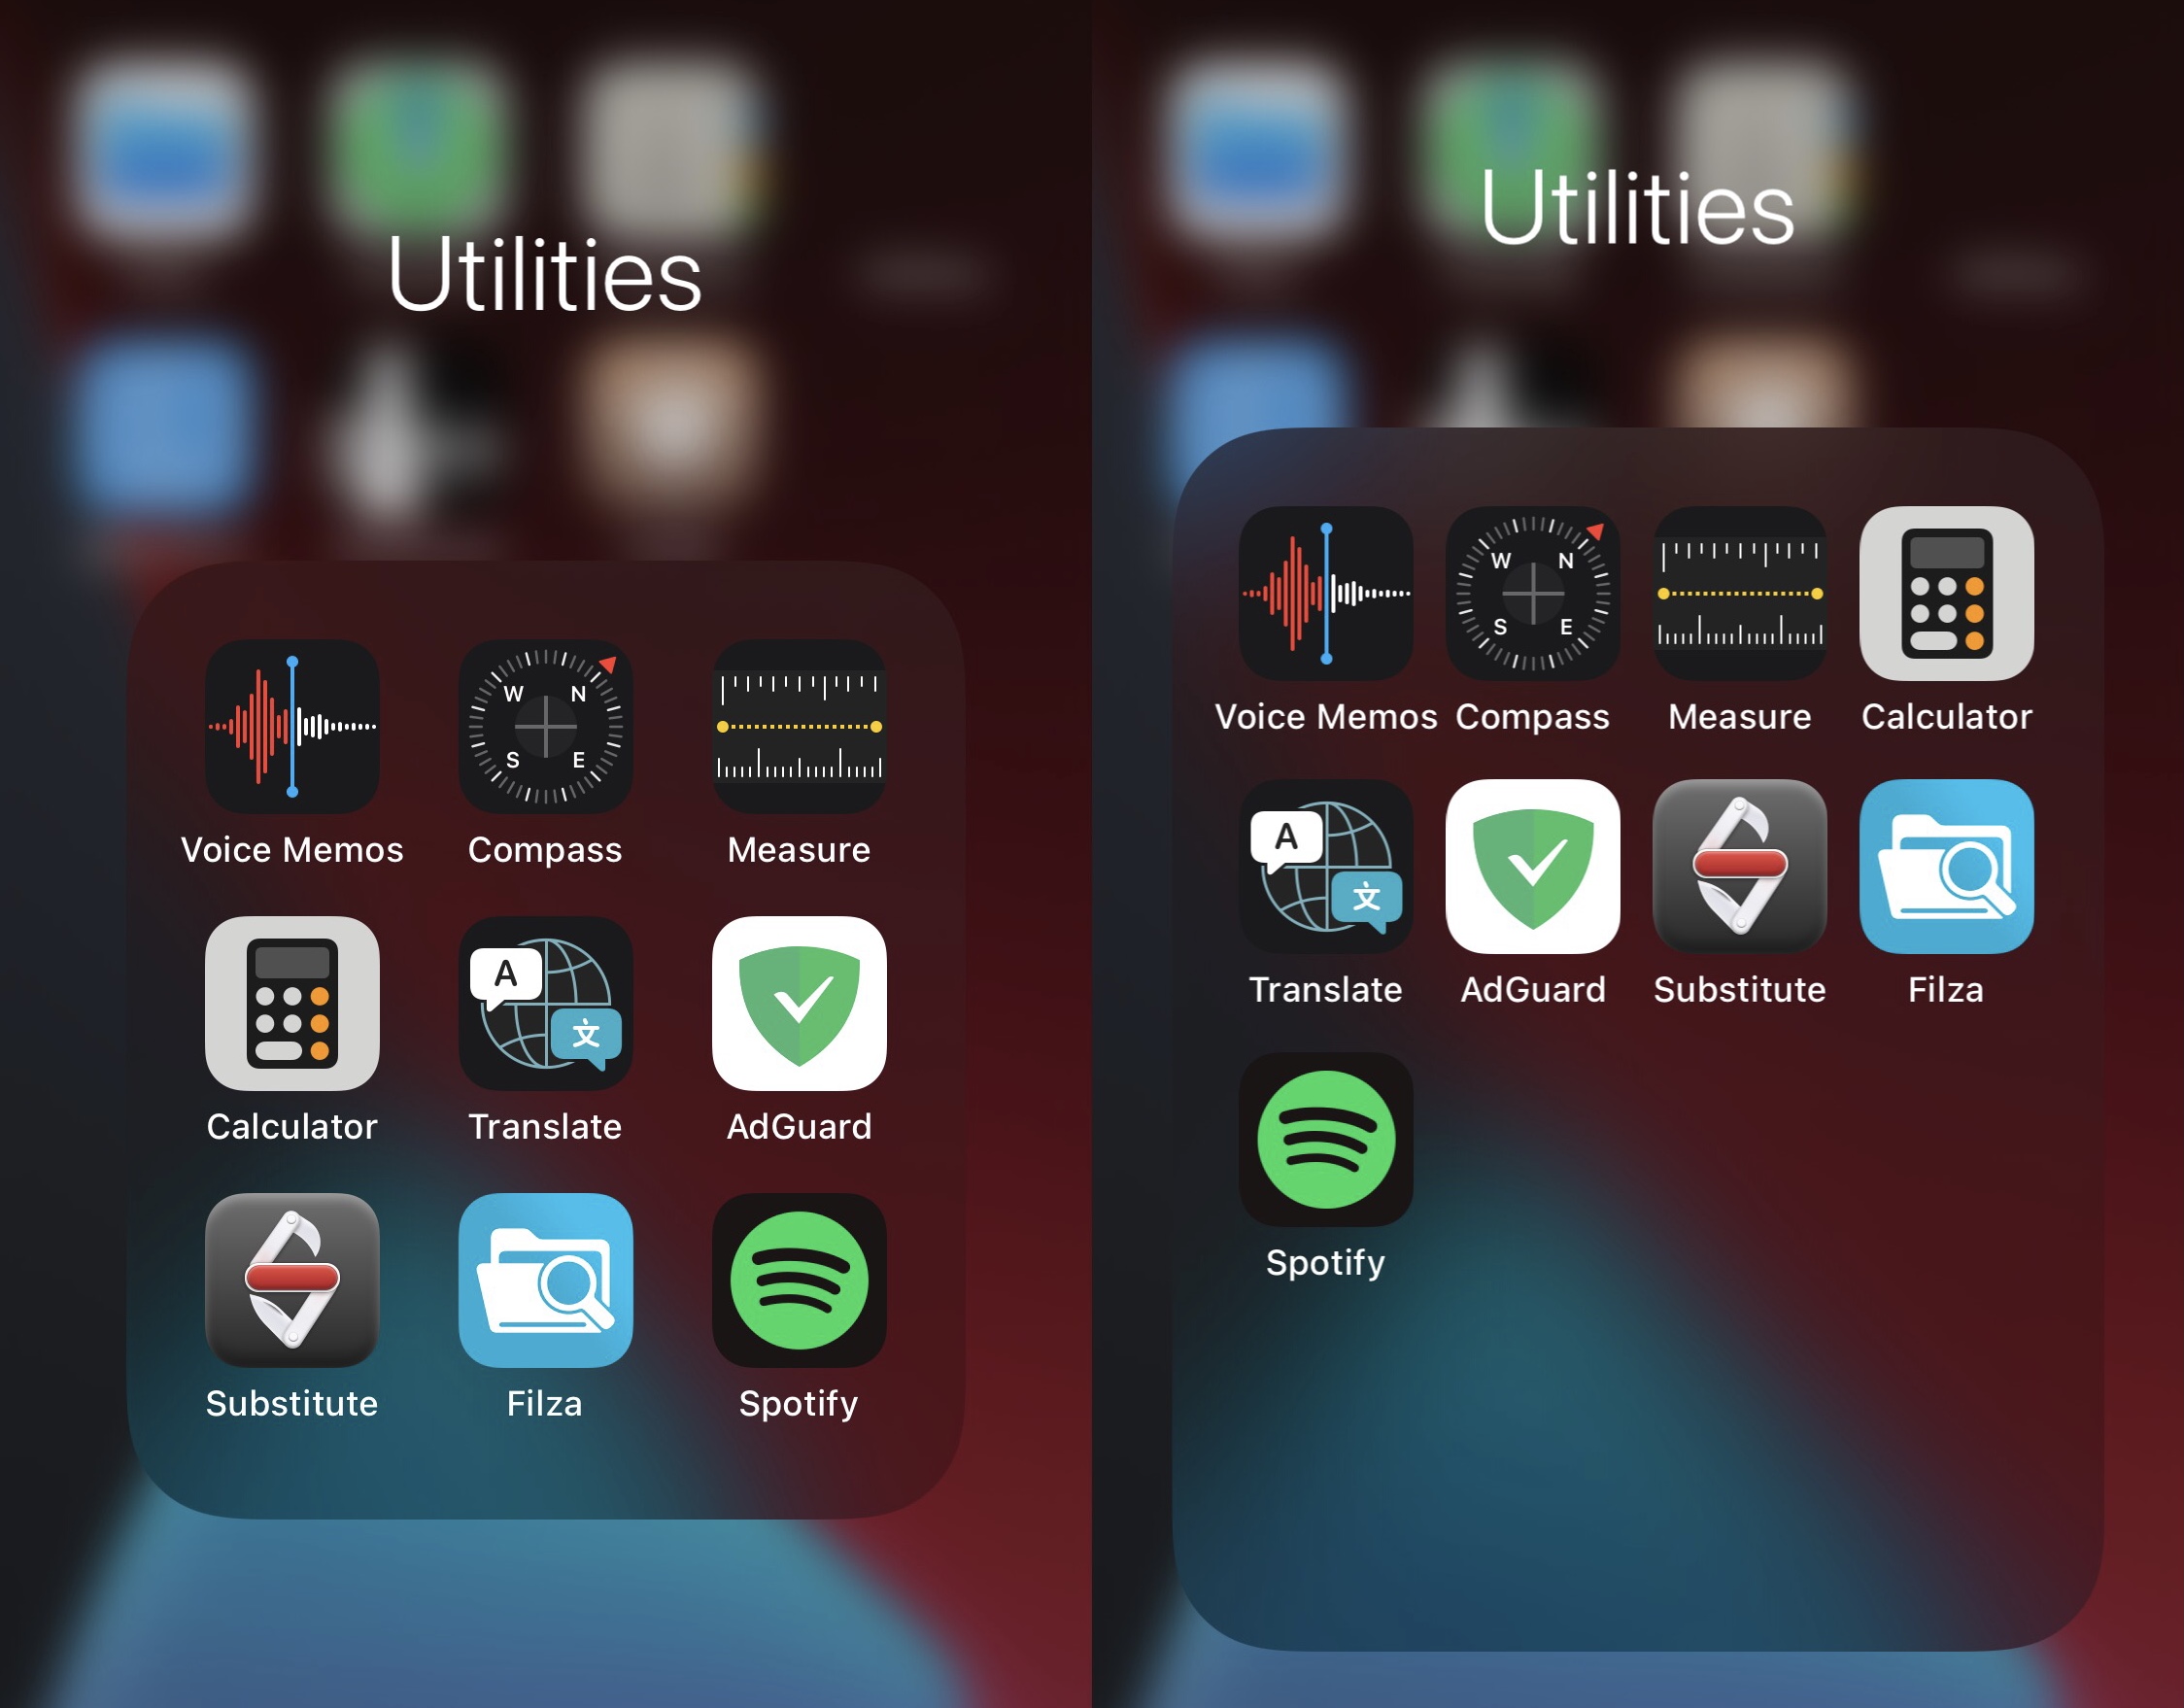 Get a 4x4 grid in your jailbroken iPhone's folders with 4ders